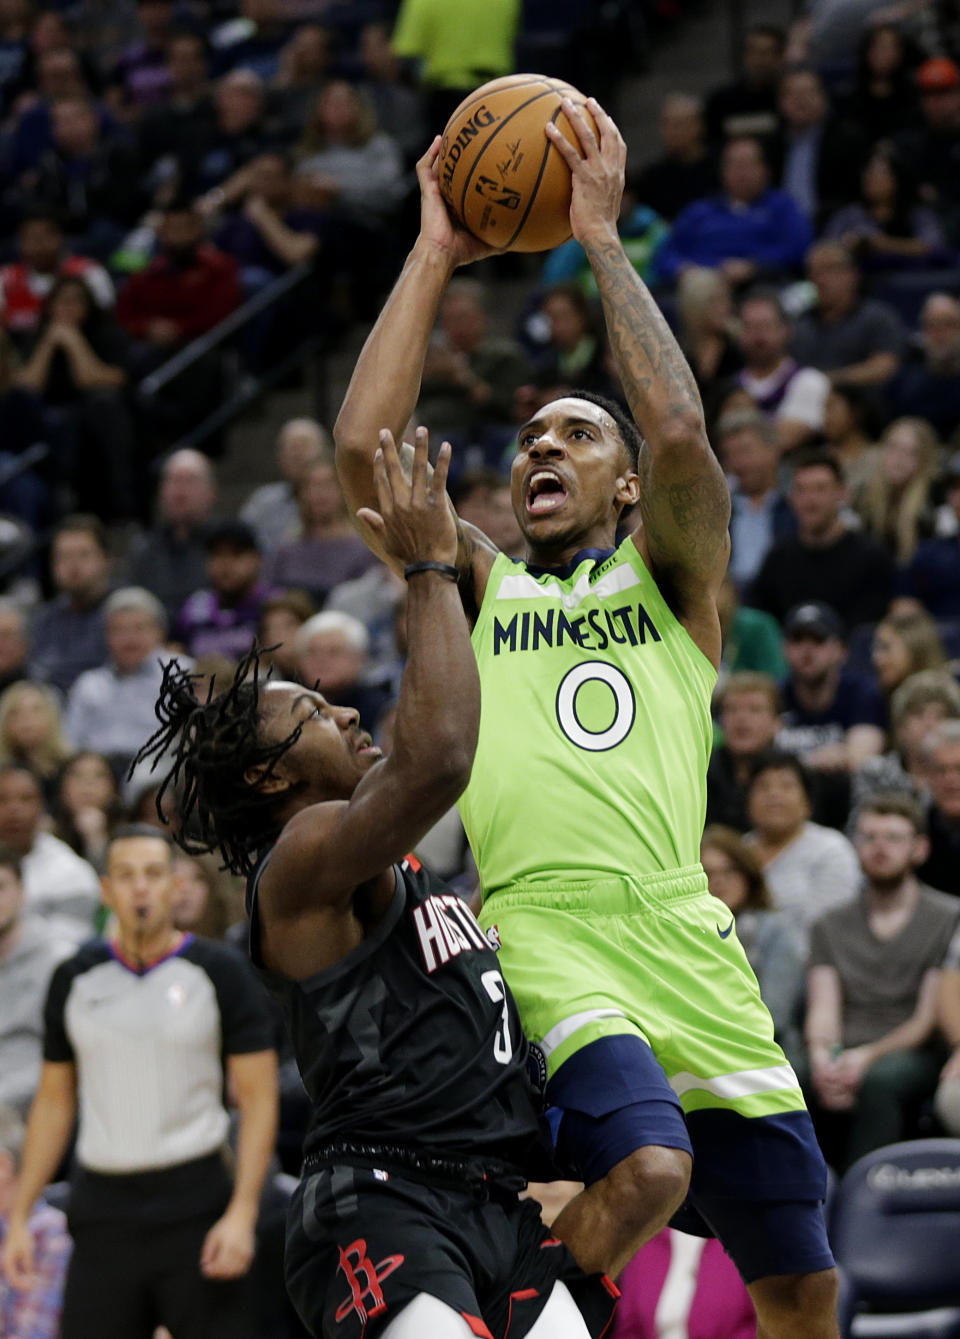 Minnesota Timberwolves guard Jeff Teague (0) shoots against Houston Rockets guard Chris Clemons (3) in the first quarter during an NBA basketball game Saturday, Nov. 16, 2019 in Minneapolis. (AP Photo/Andy Clayton- King)